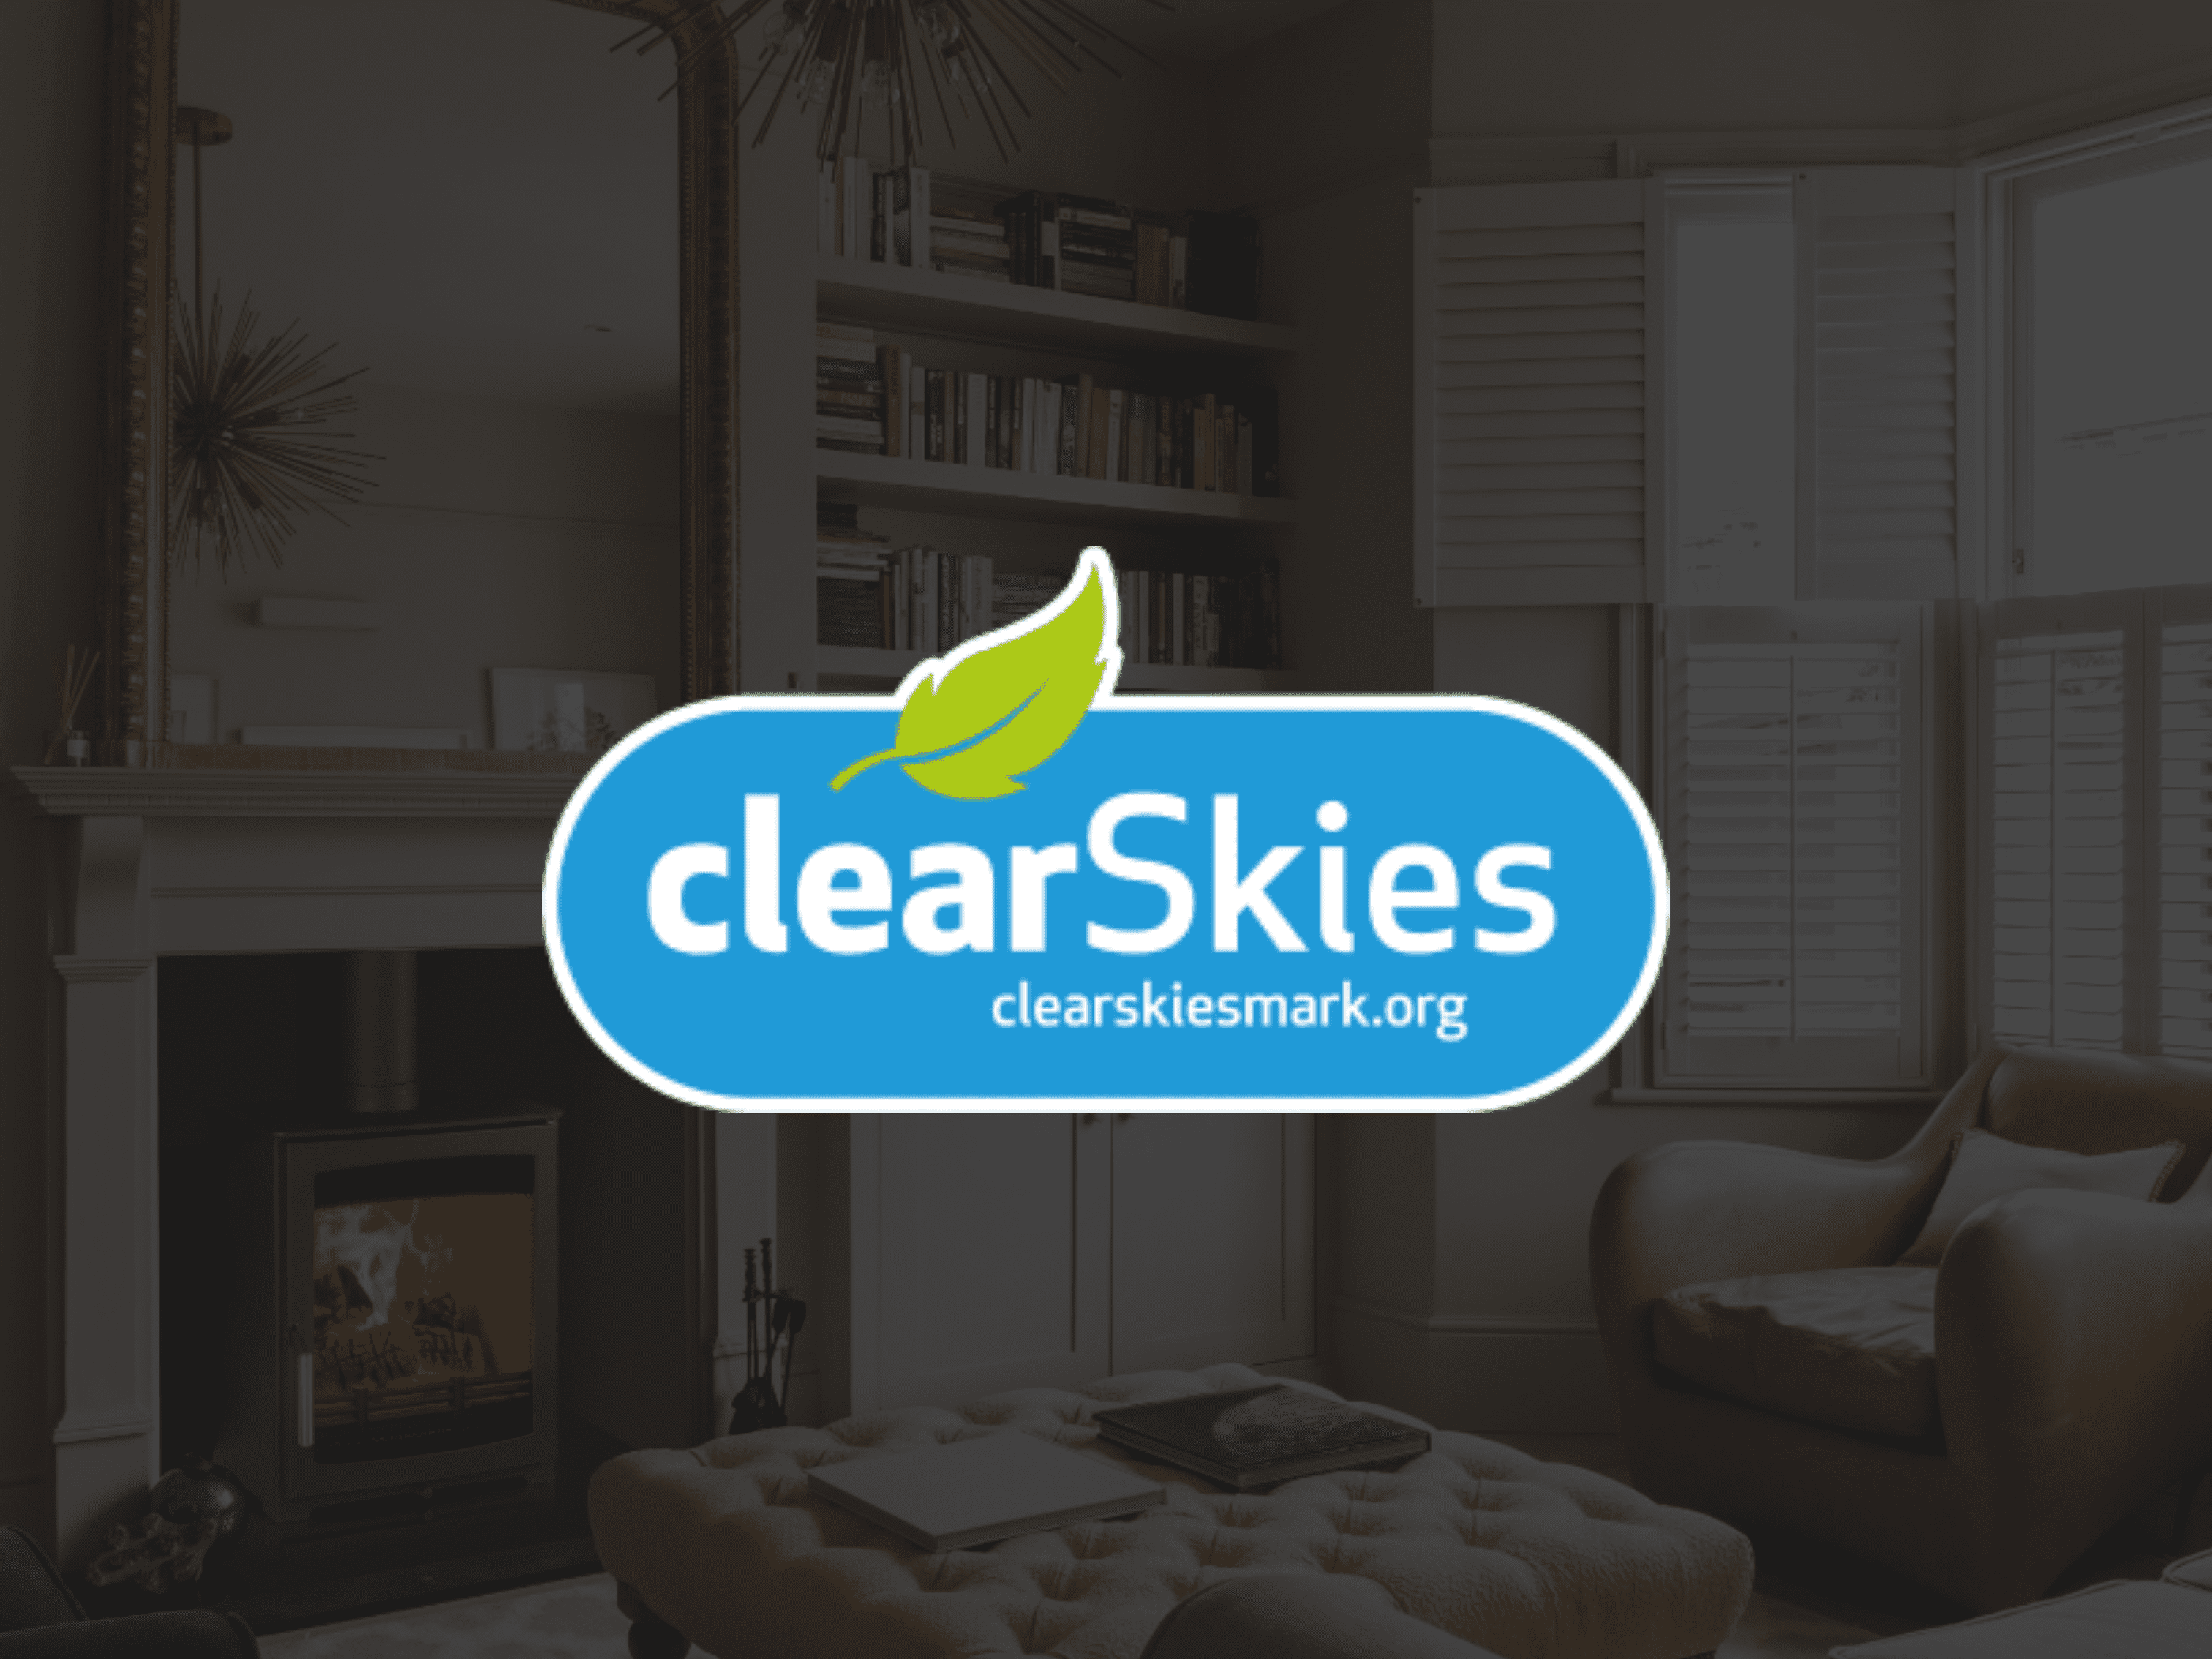 What is the ClearSkies mark certification scheme for emissions